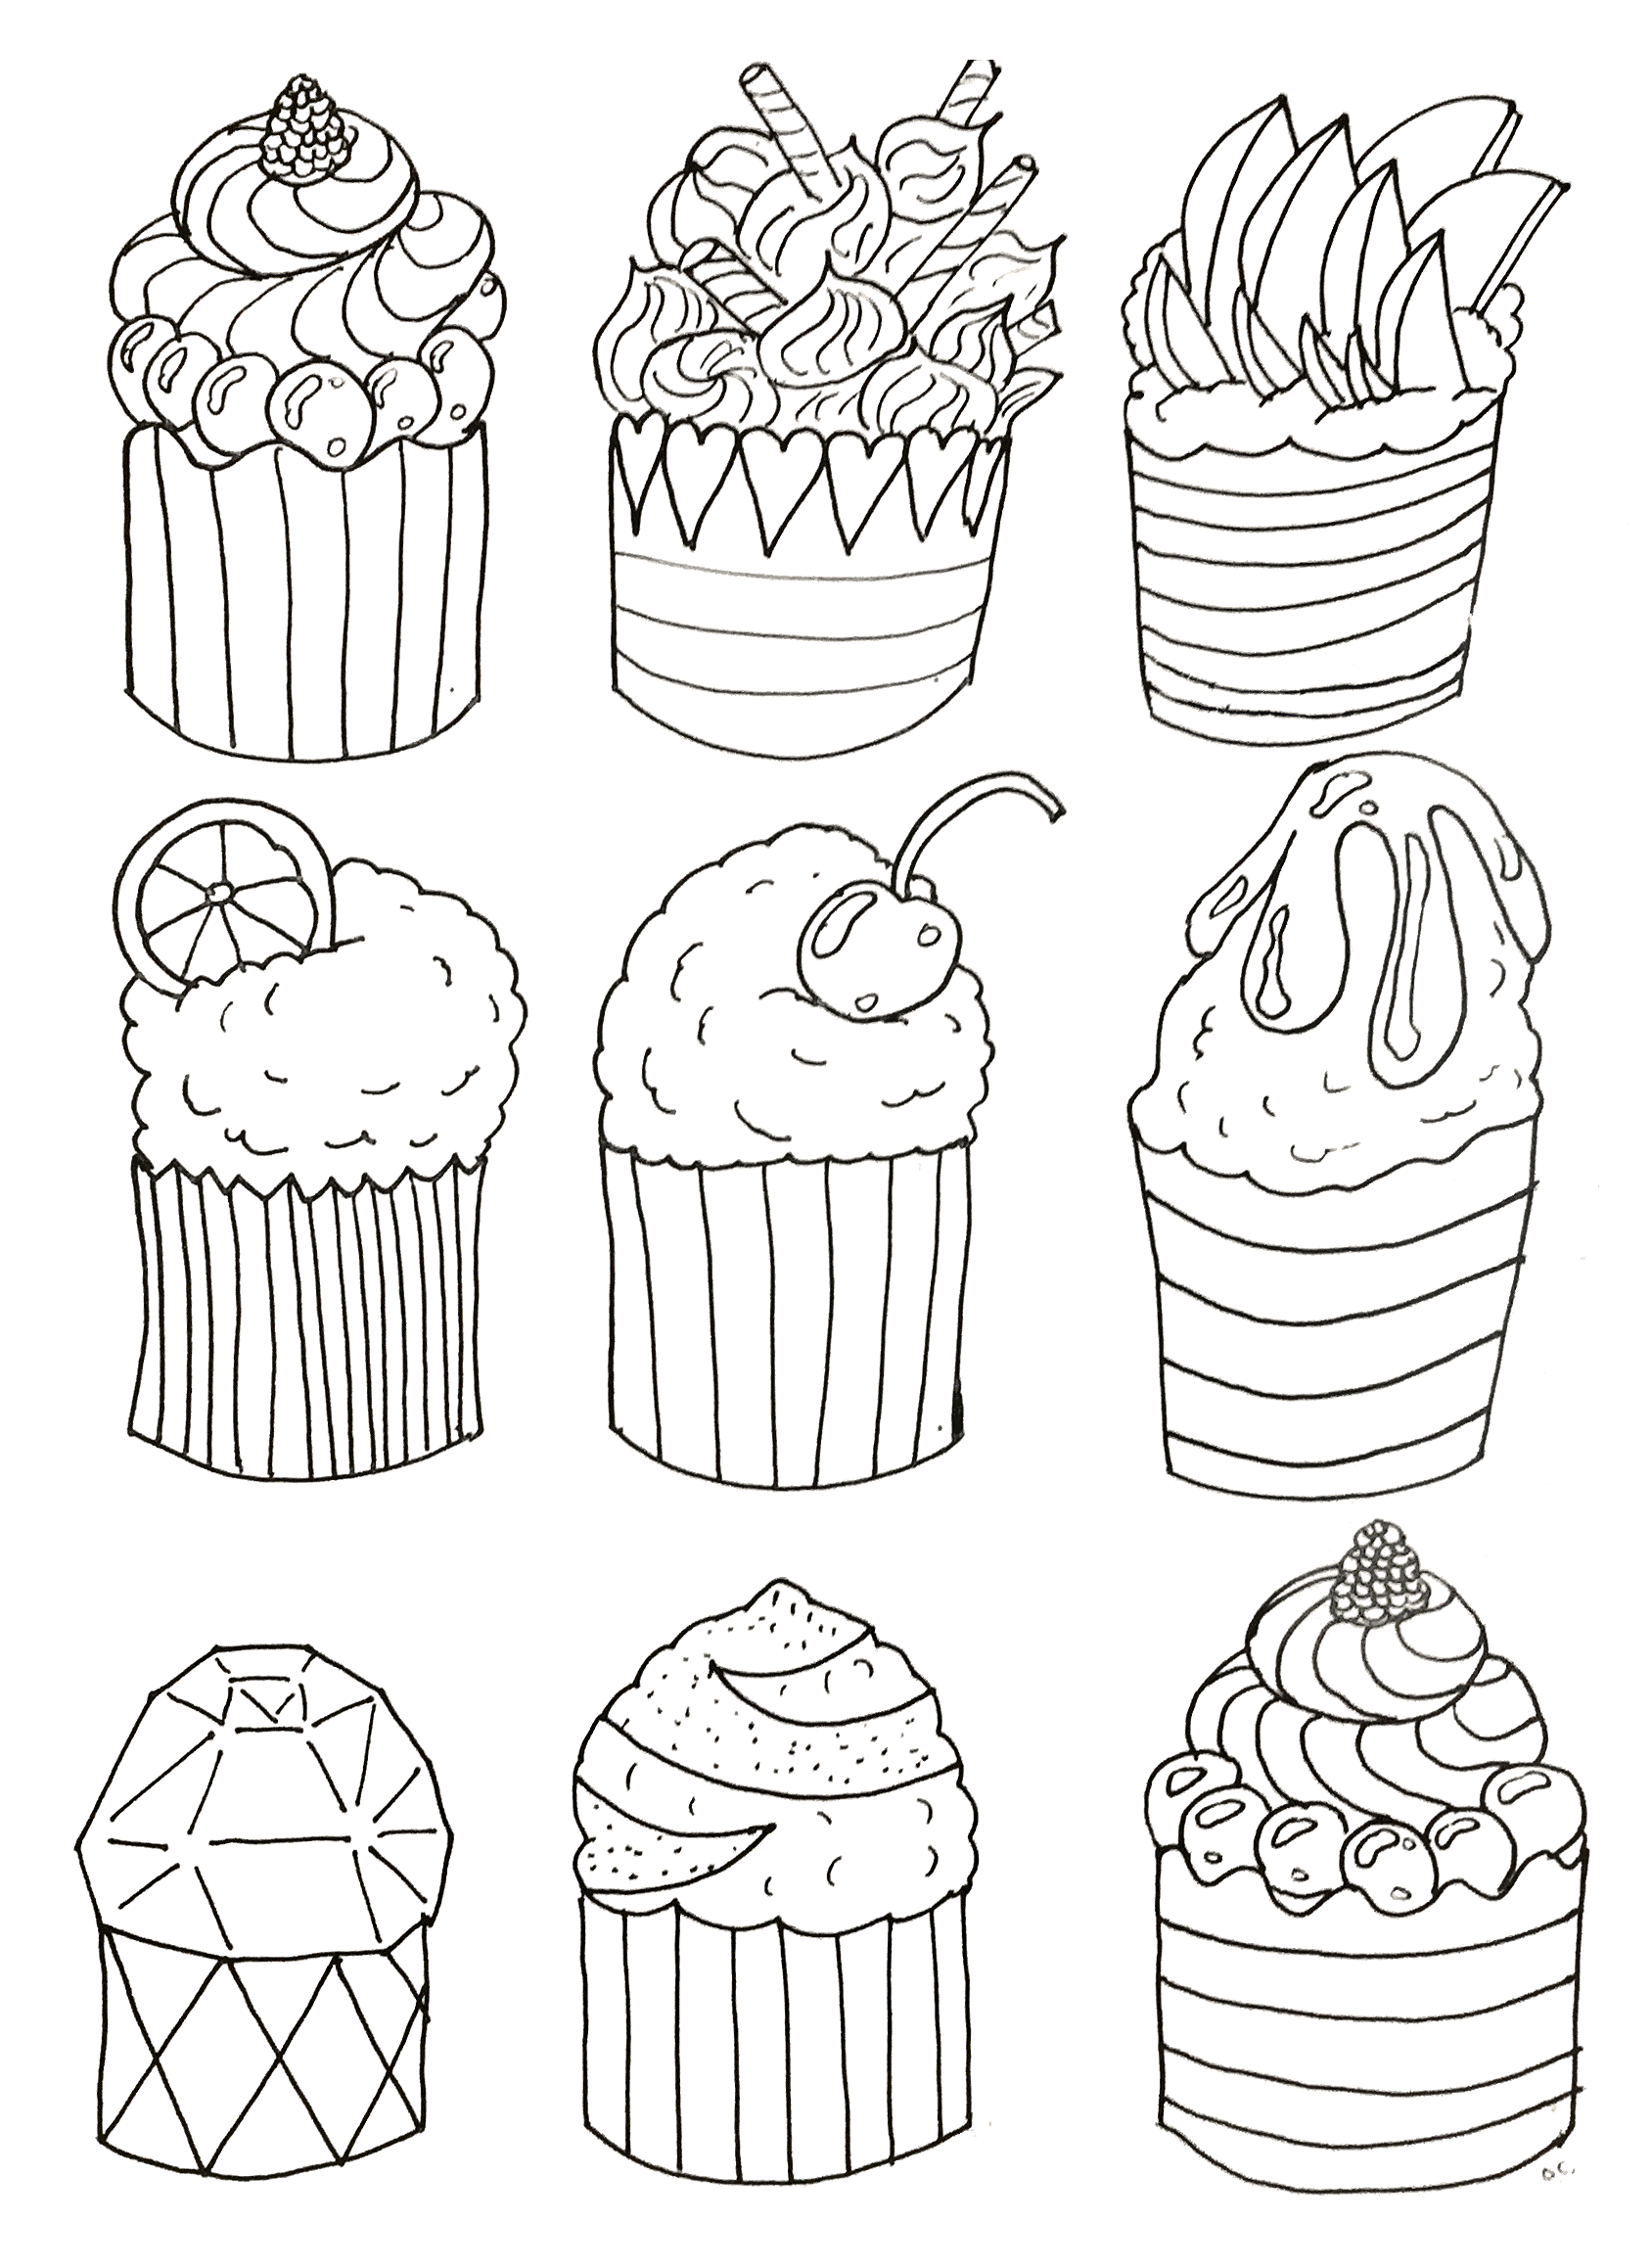 Incredible Adult coloring page to print and color for free